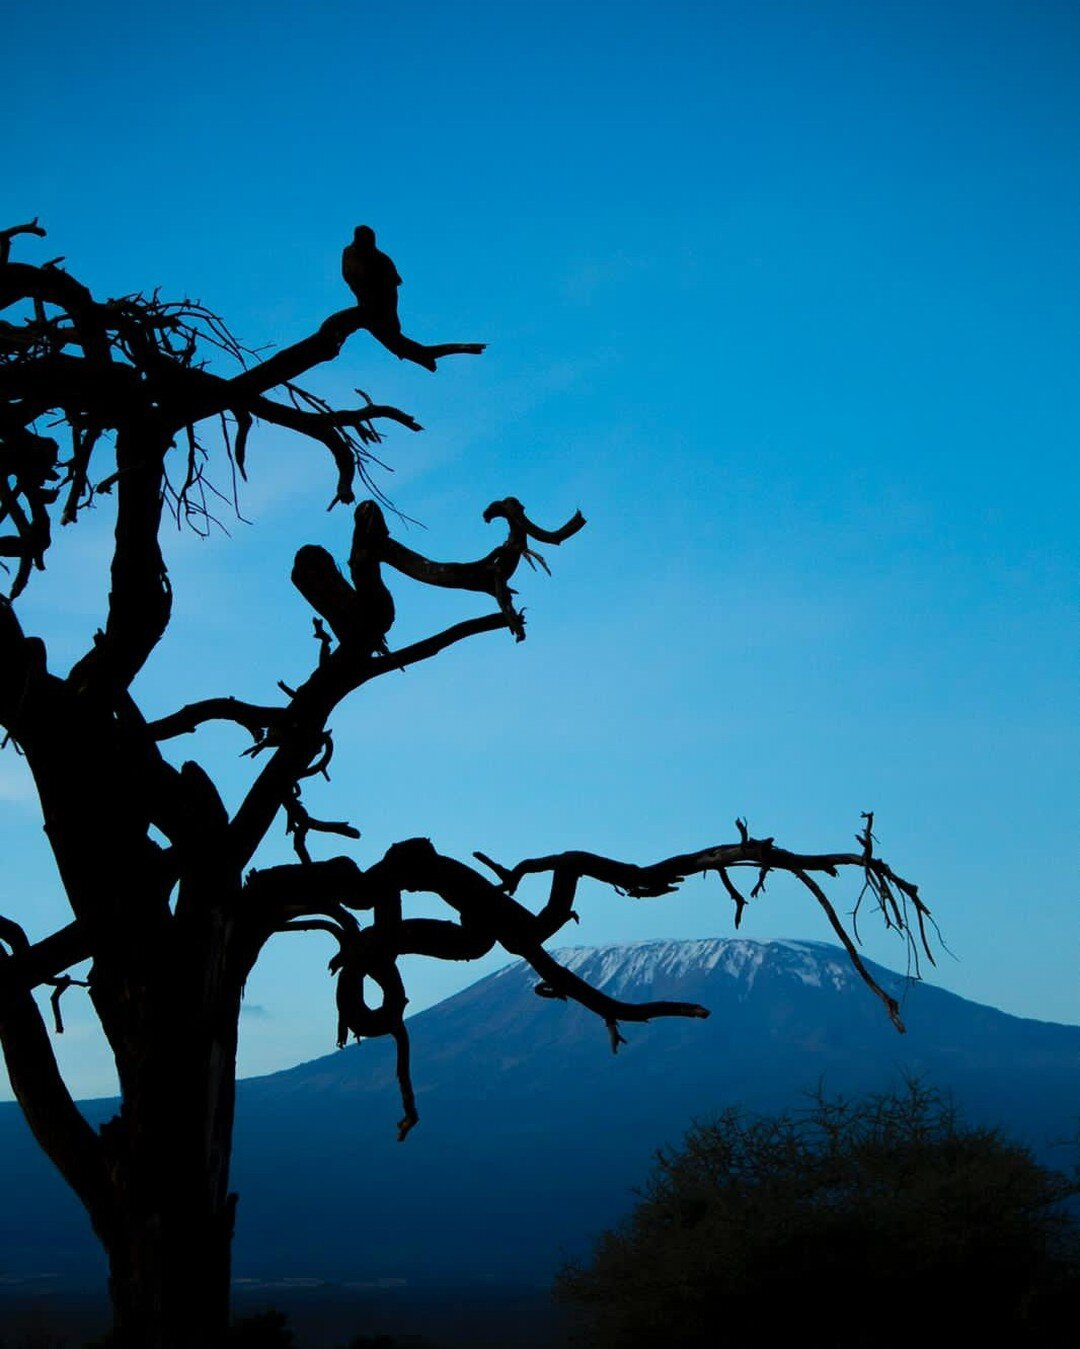 A clear crisp evening in the conservancy, silhouettes of an ancient tree, a roosting bird of prey &amp; majestic Mt. Kilimanjaro in the background! 

📸@oliverlidert

__________________
www.tawilodge.com
__________________

#photo #photooftheday #blu